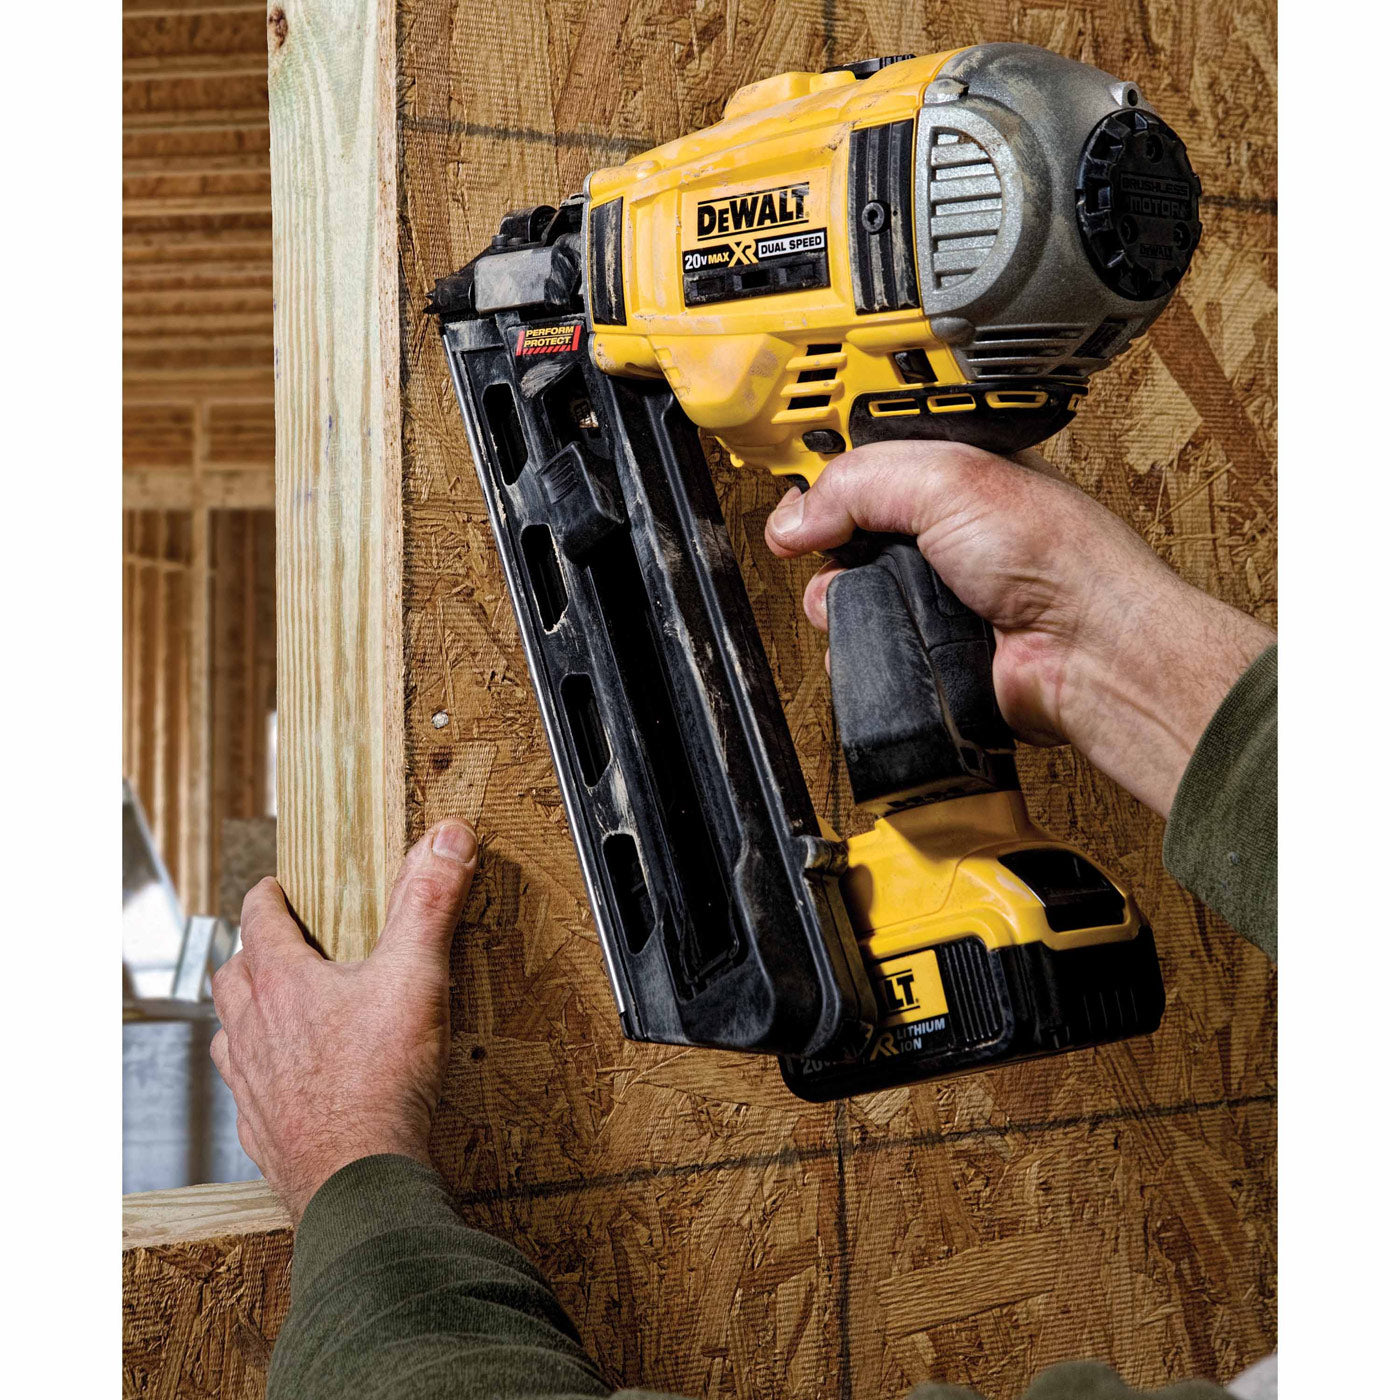 DEWALT 20V MAX XR Lithium-Ion Cordless Brushless 2-Speed 30° Paper Collated  Framing Nailer (Tool Only) DCN692B - The Home Depot